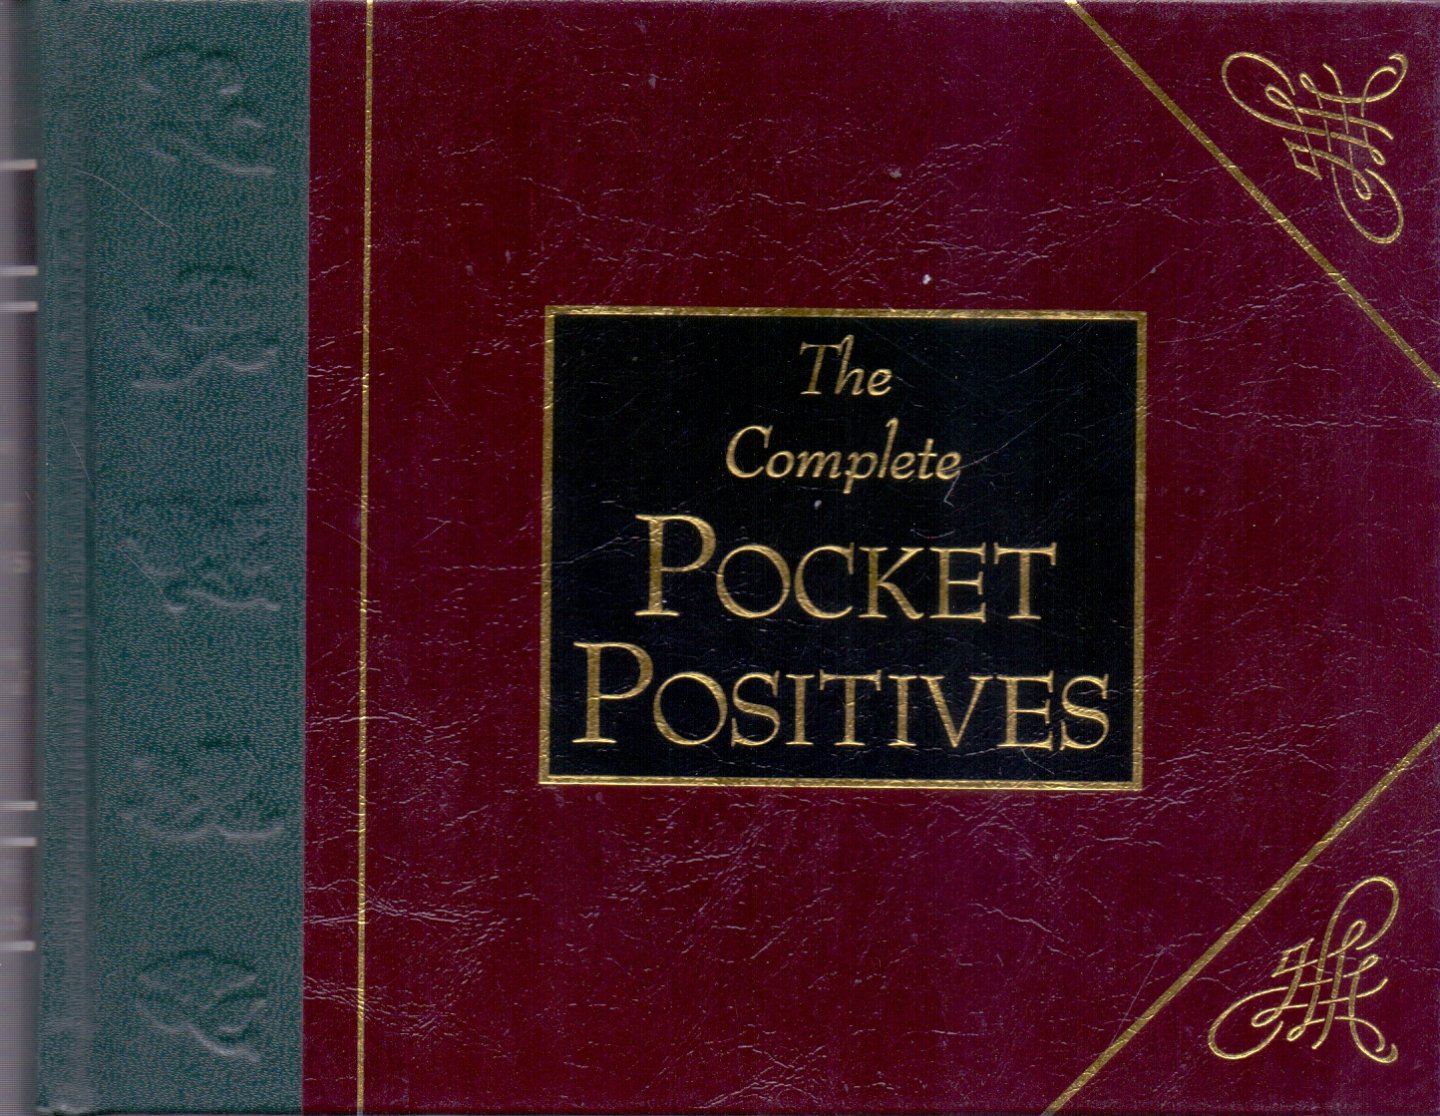 Pinkney, Maggie (editor) (ds1290) - Complete Pocket Positives. An anthology of inspirational thoughts